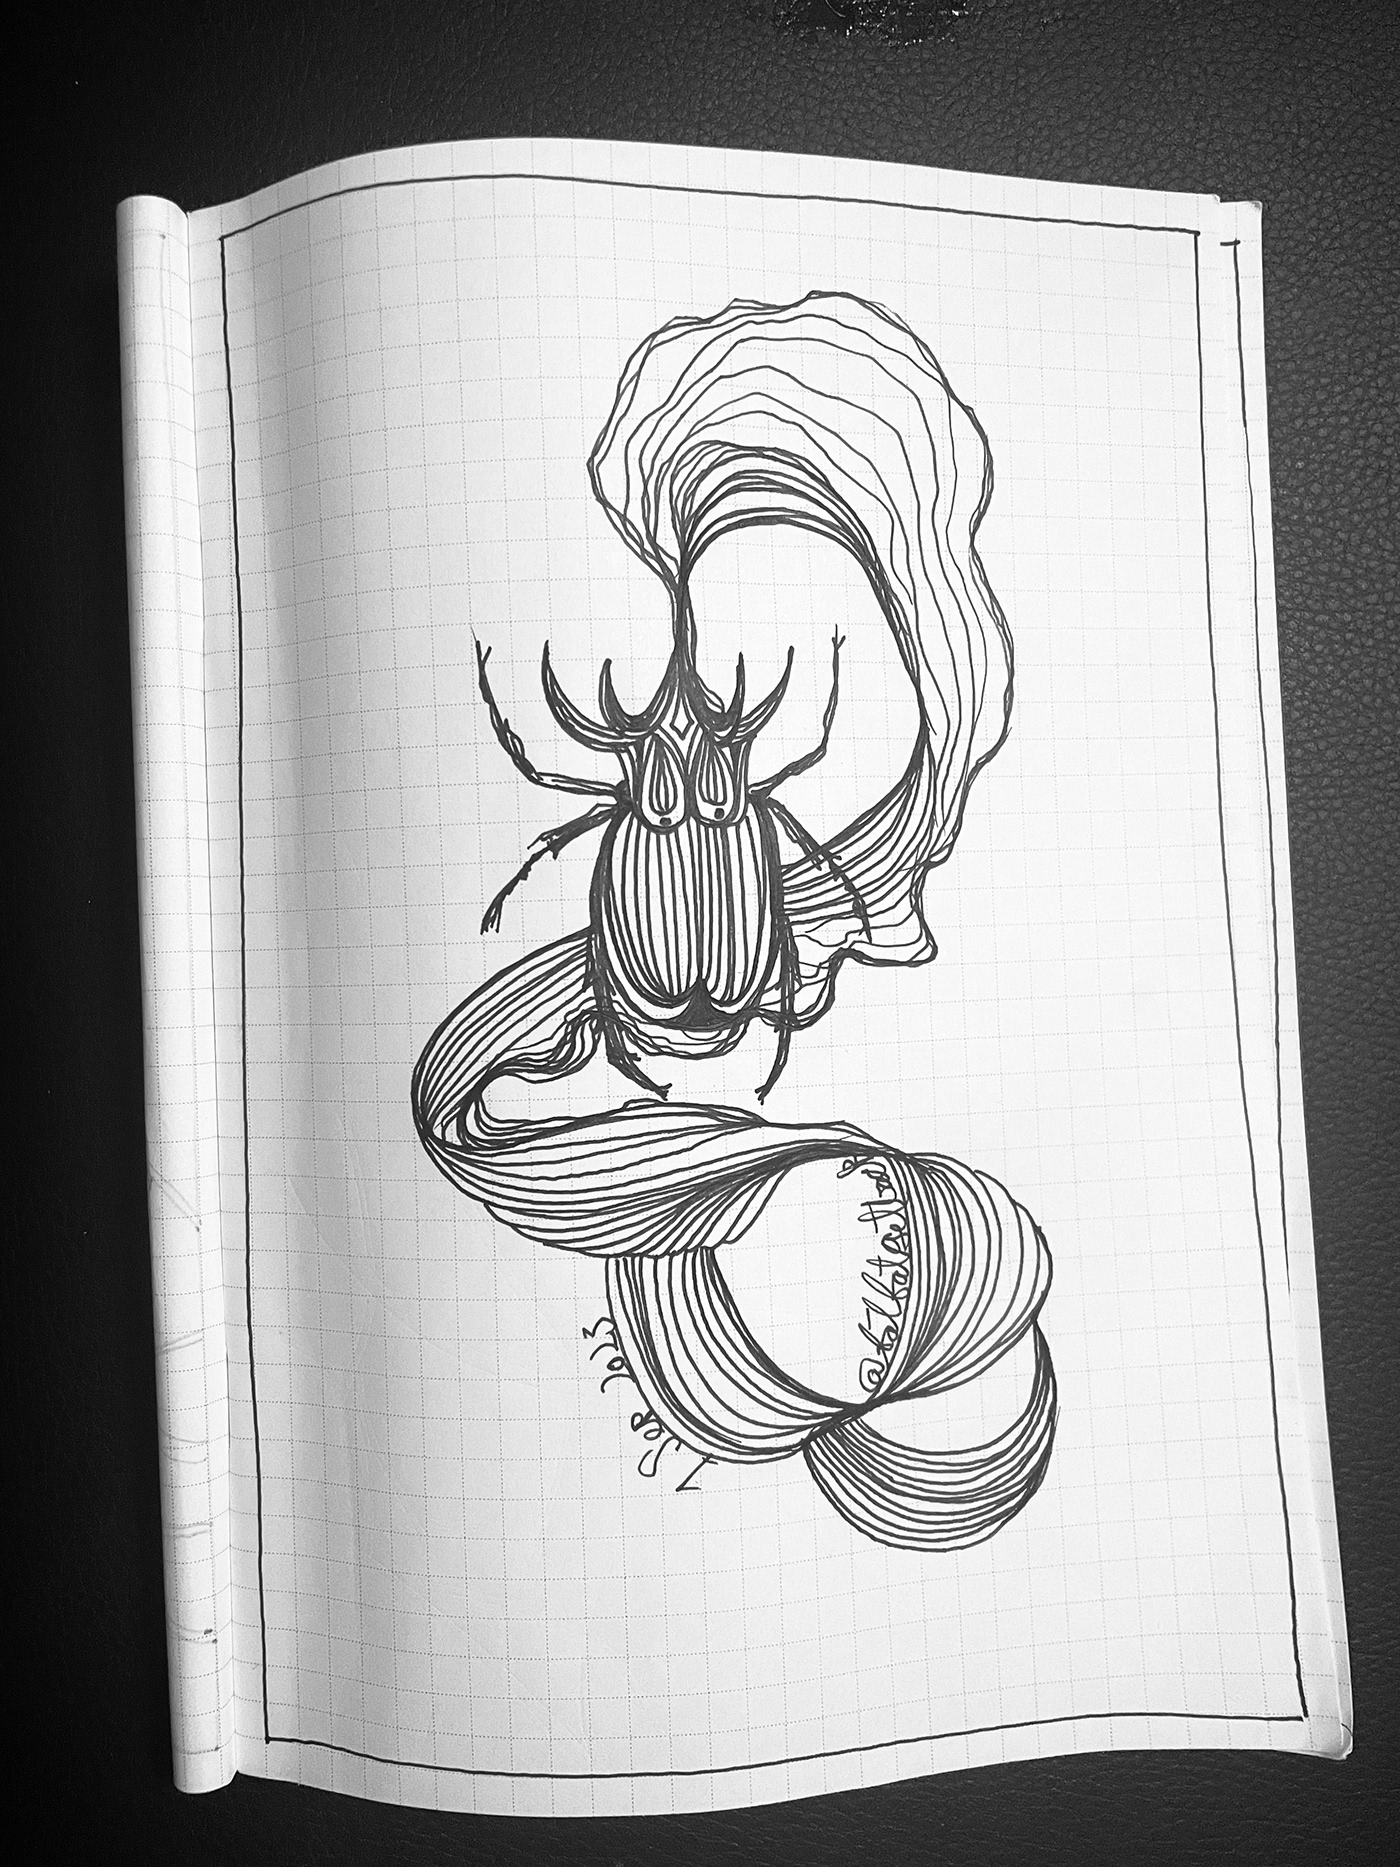 linework lineart linedrawing blackandwhite abstractart monster penandpaper   sketch handdrawings pendrawing art pieces recording fictitious backtopaper blackpen dailysketch fatfatgetback linedoodle paperdrawing quicksketch